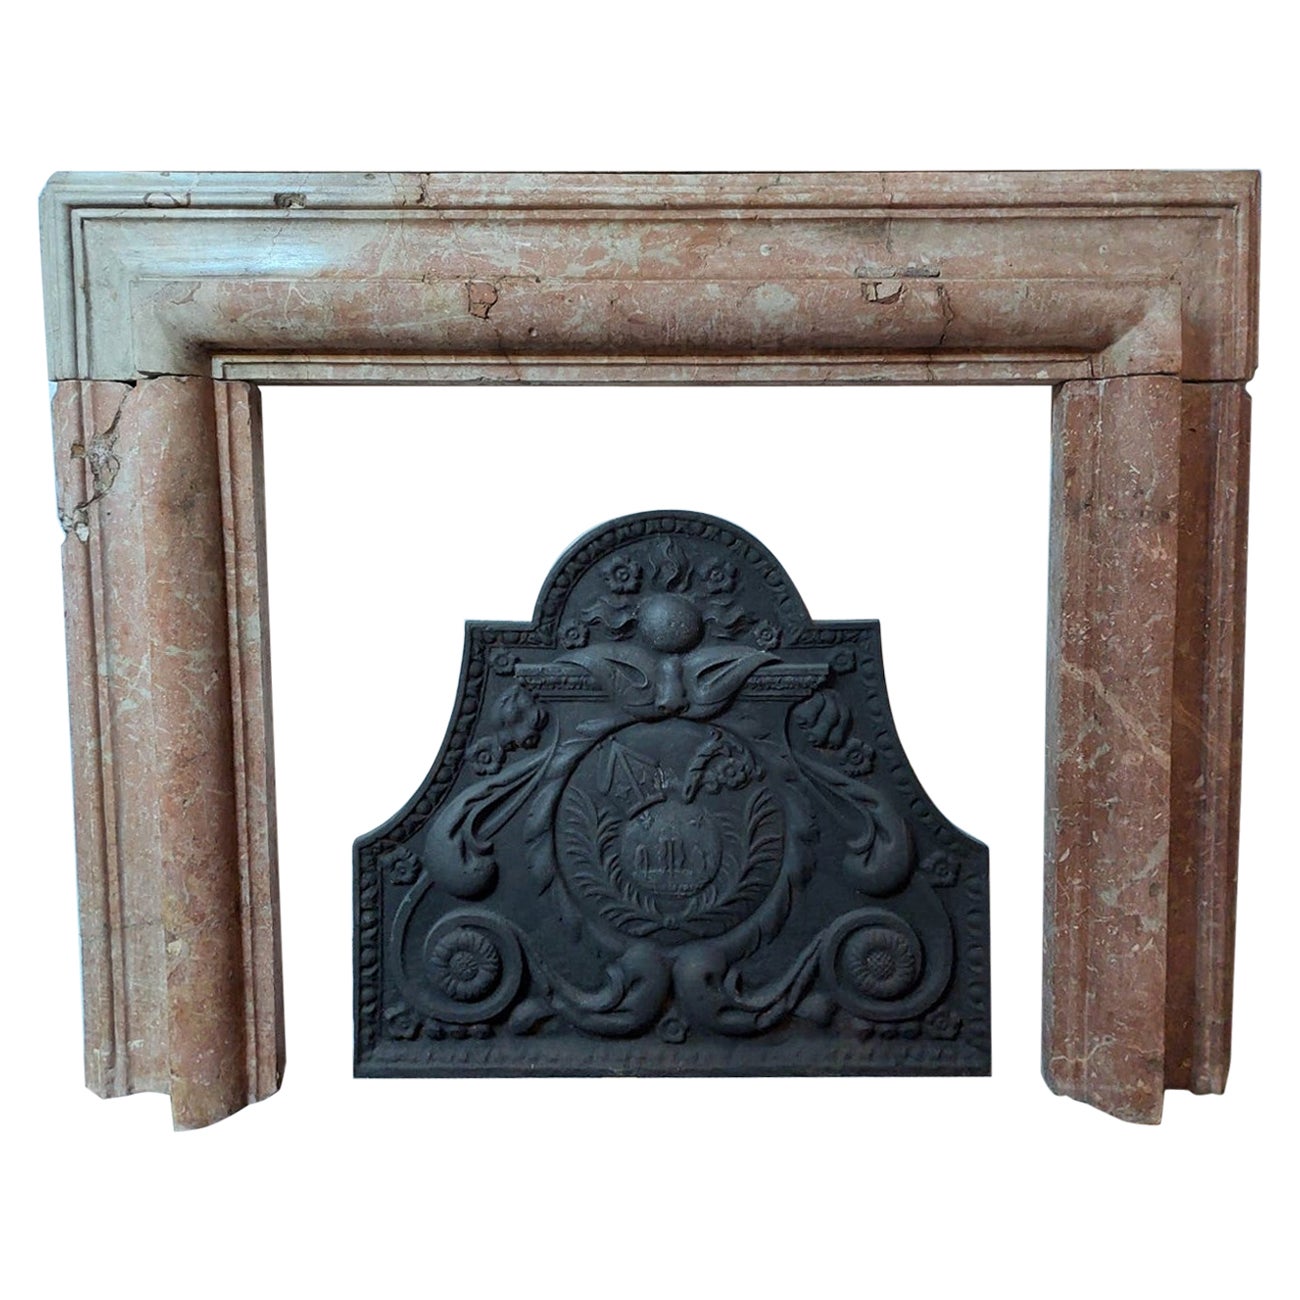 Antique Fireplace Mantle in "Macchia Vecchia" Red Marble, 17th Century Italy